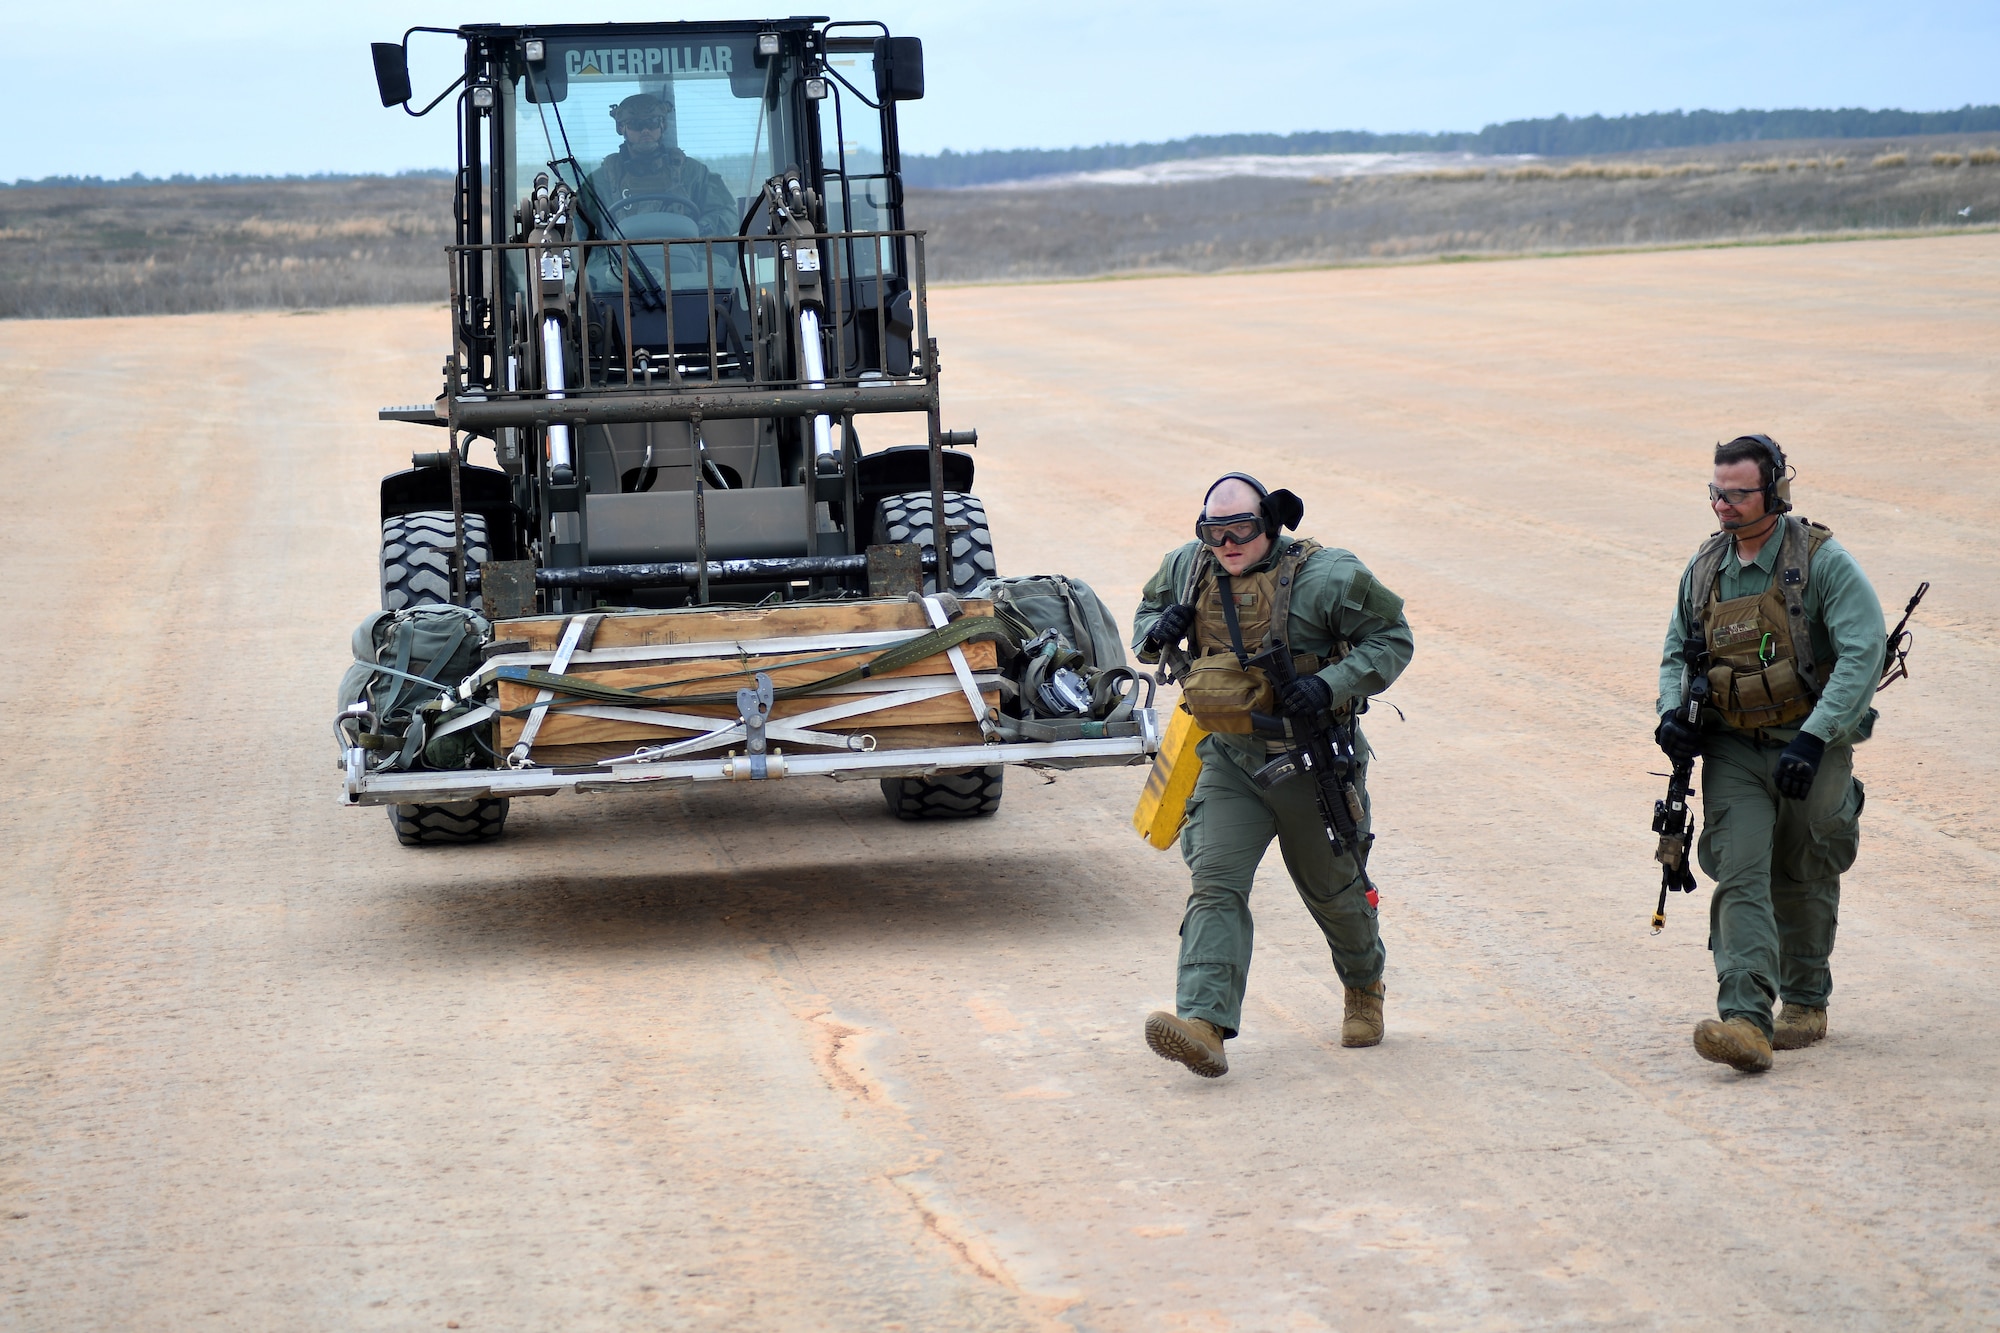 Aerial porters assigned to the 921st Contingency Response Squadron out of Travis Air Force Base, Calif., prepare to load cargo into a C-130 Hercules aircraft during a mission in support of Green Flag Little Rock exercise, Feb. 11, 2019, Fort Polk, La. The primary objective of the exercise is to support the Joint Readiness Training Center and provide the maximum number of airlift crews, mission planners and ground support elements to a simulated combat environment with emphasis on joint force integration. (U.S. Air Force photo by Tech. Sgt. Liliana Moreno)